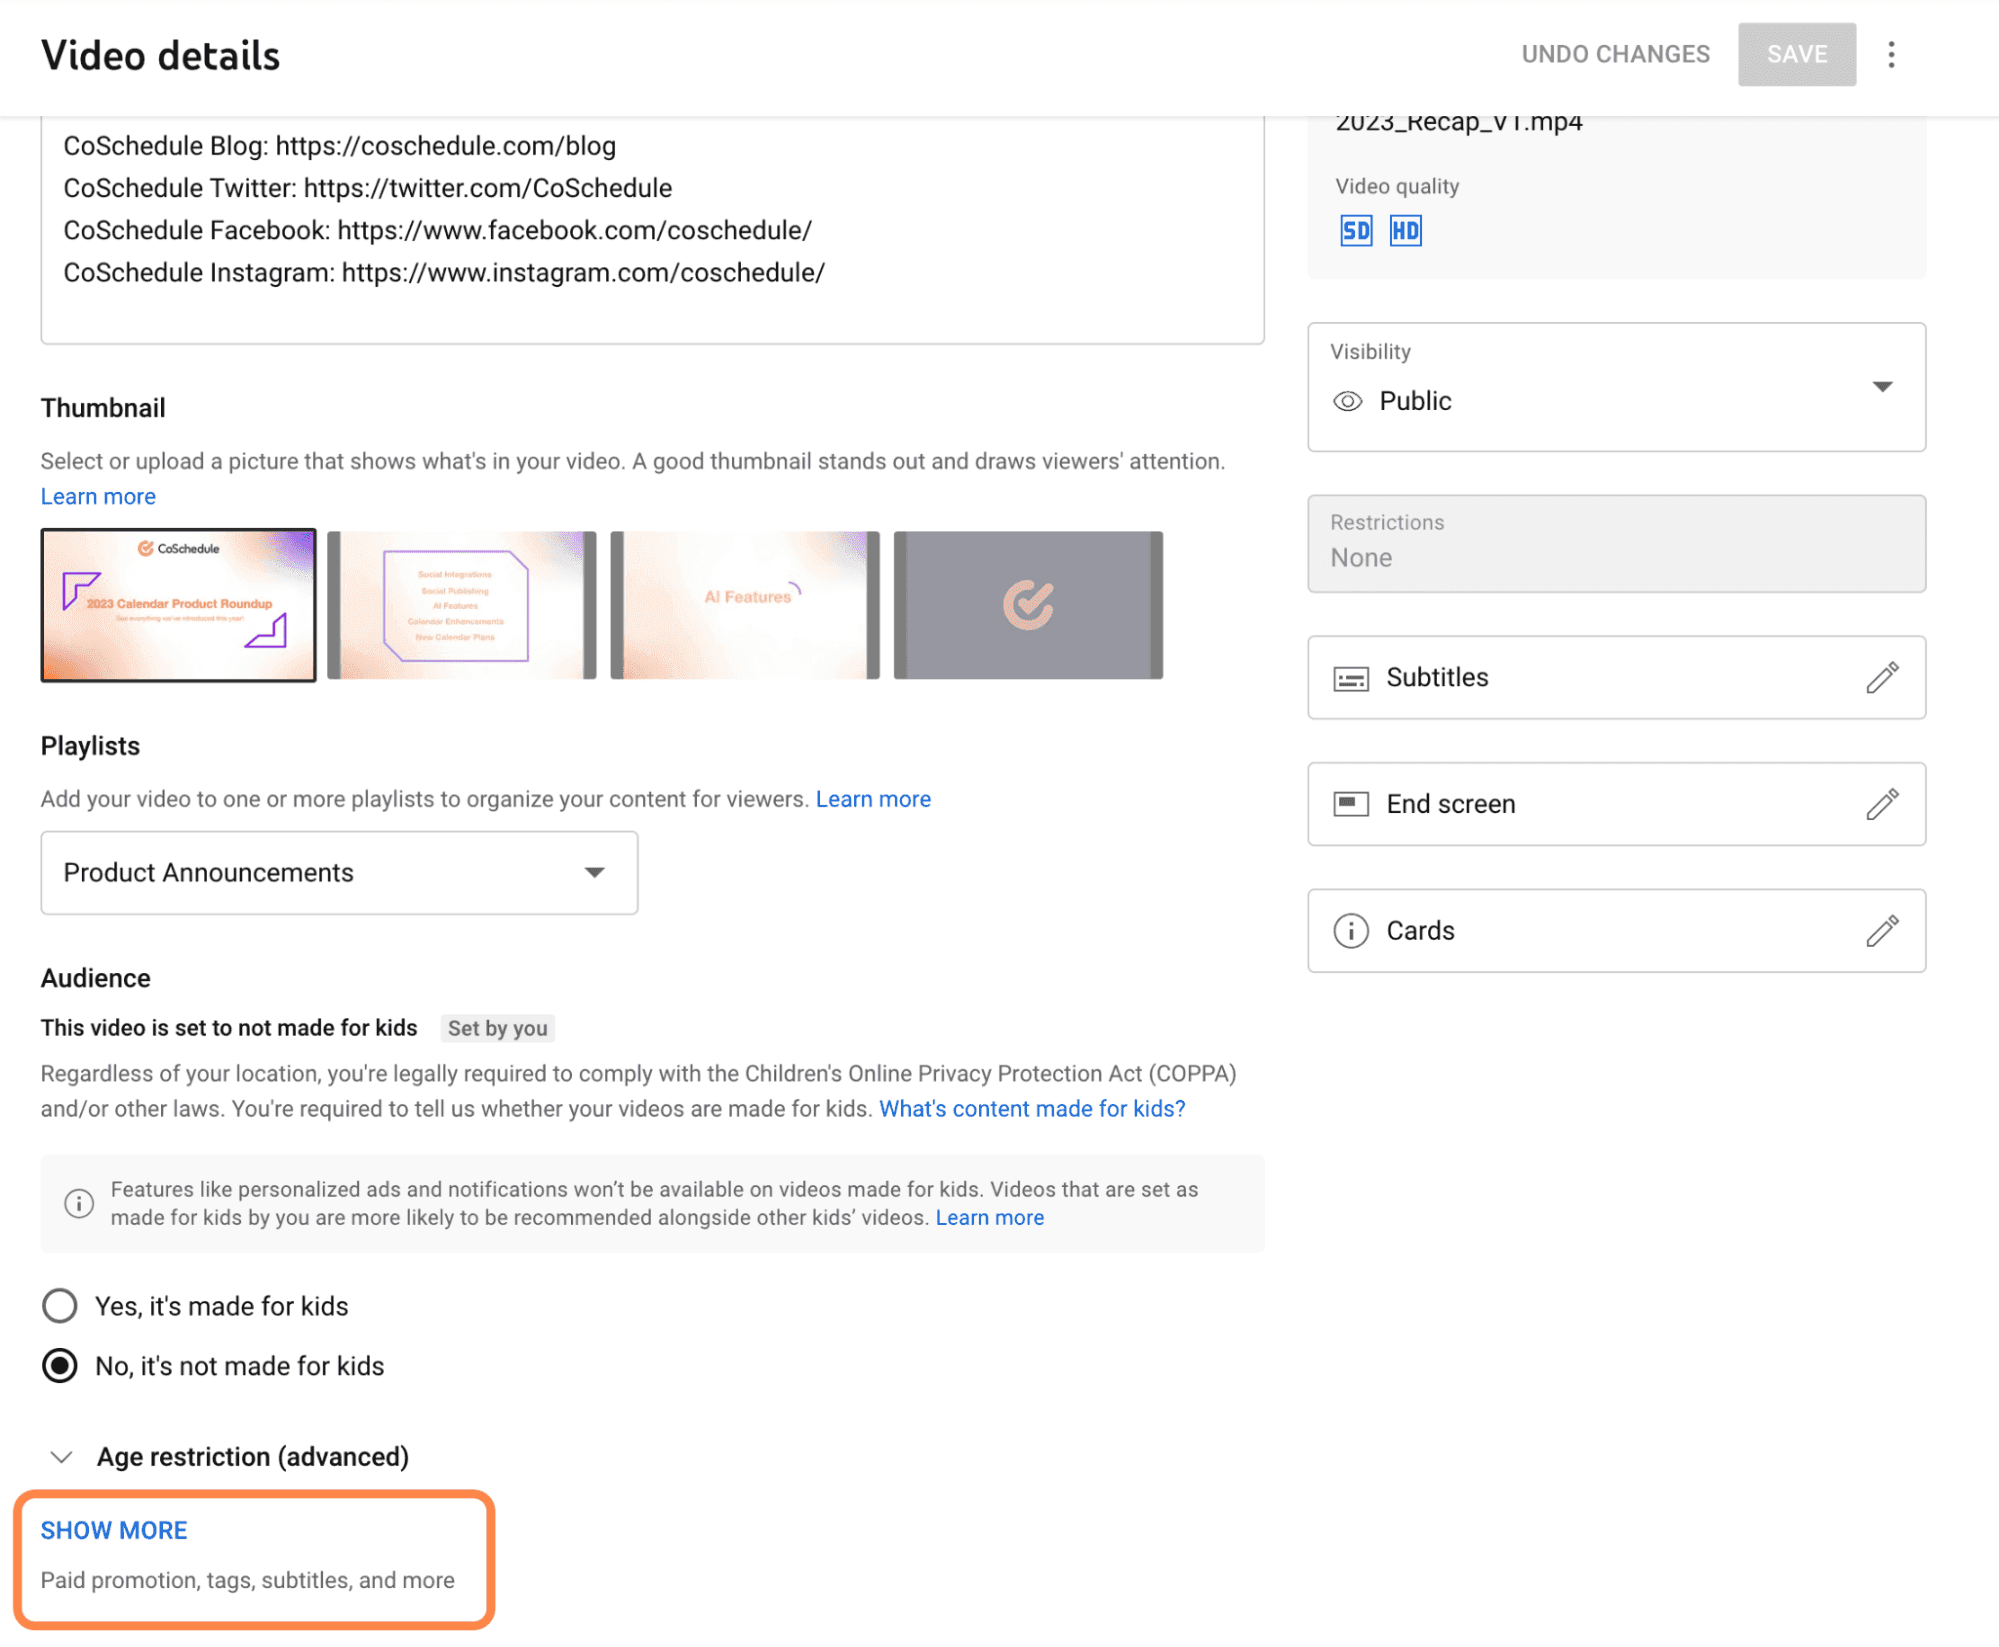 Adding a tag - Video details section with "Show More" highlighted